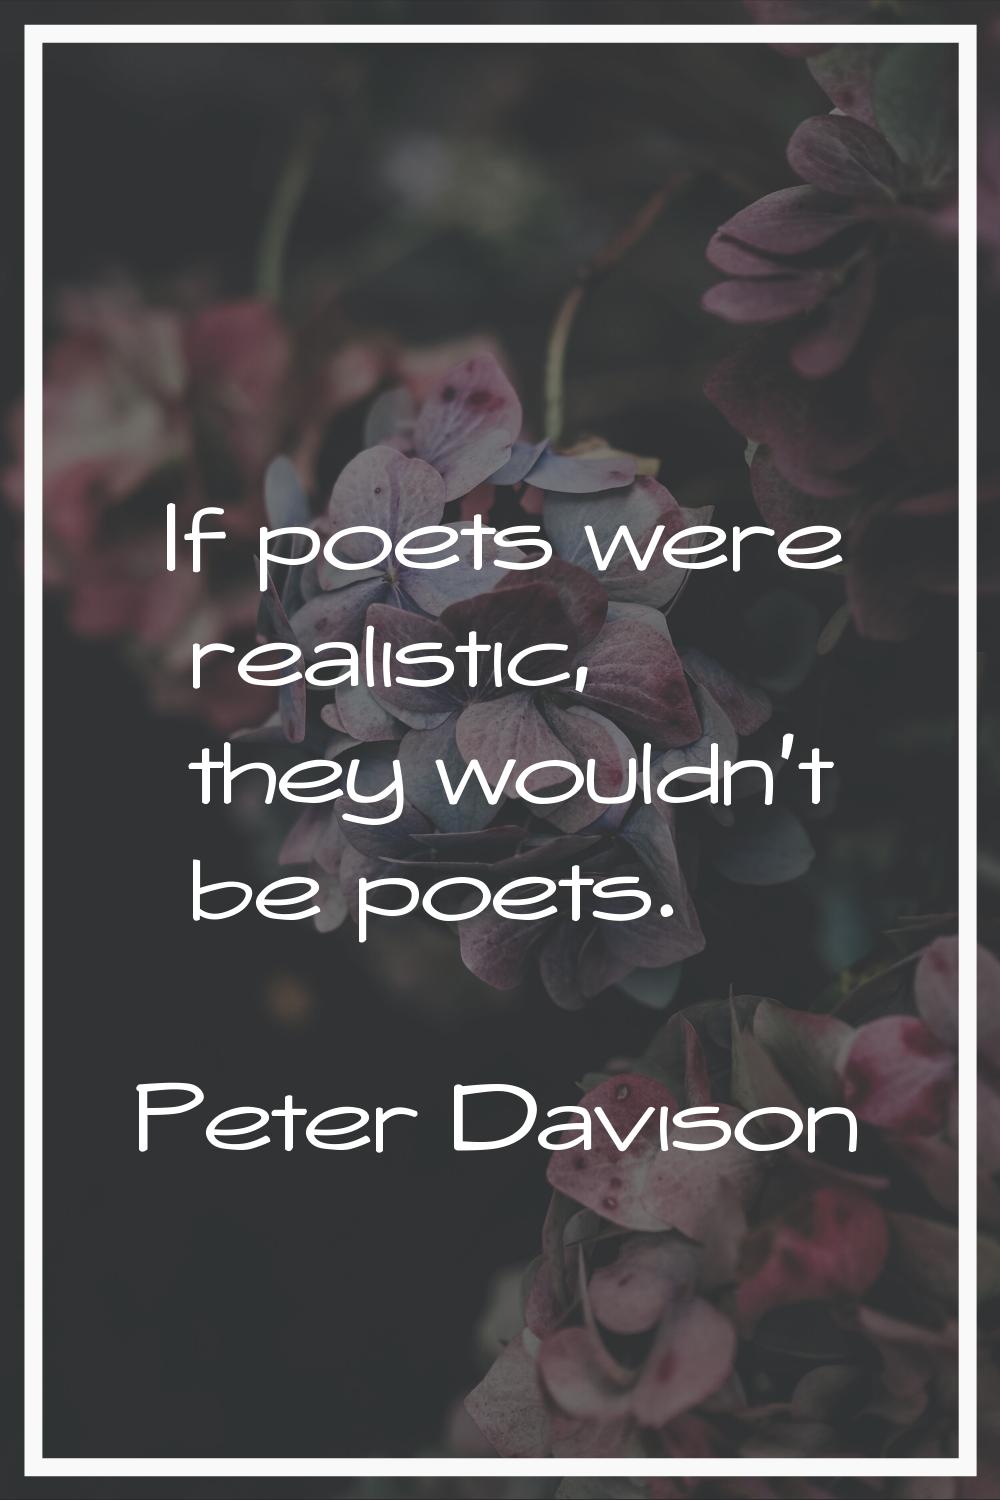 If poets were realistic, they wouldn't be poets.